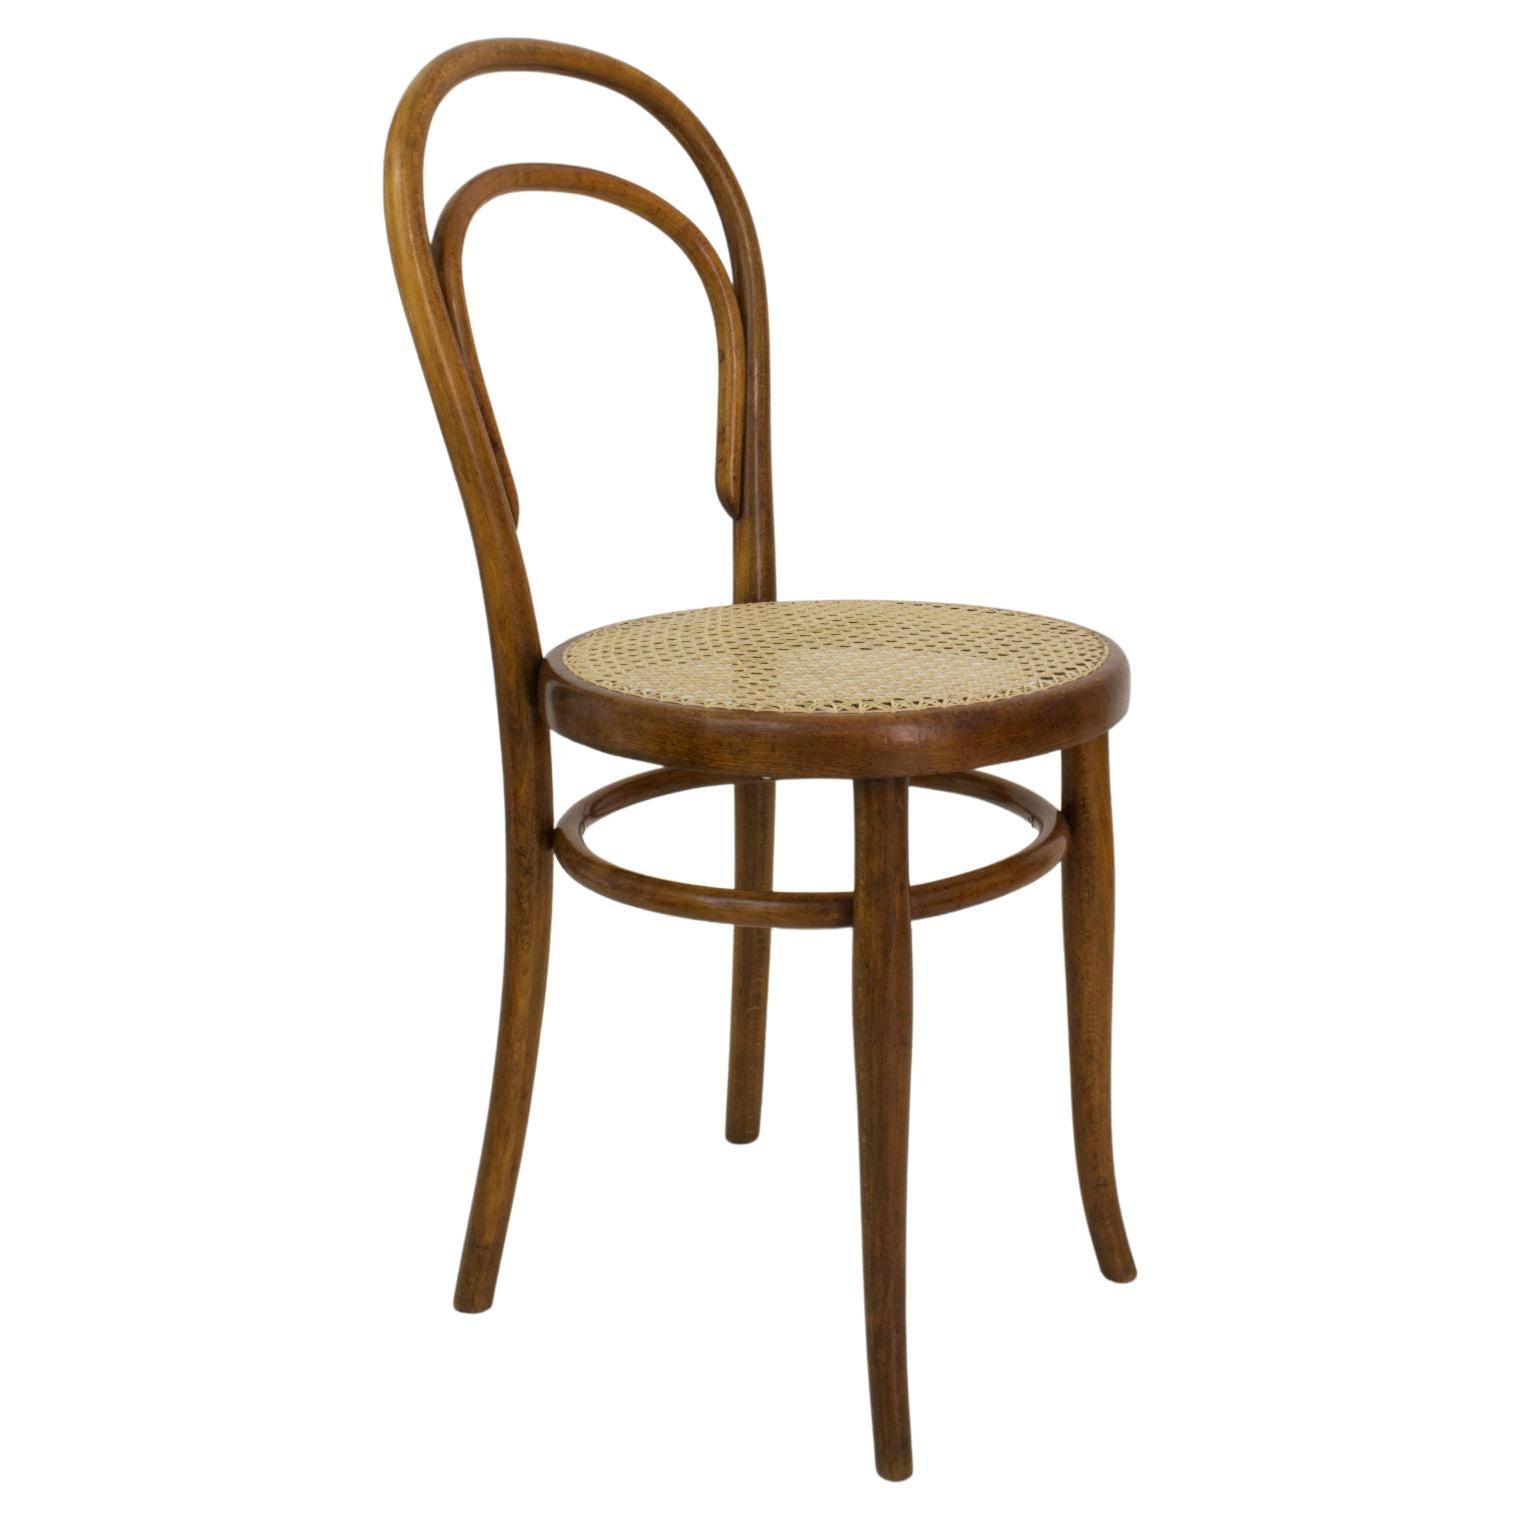 What is a Thonet-style chair?